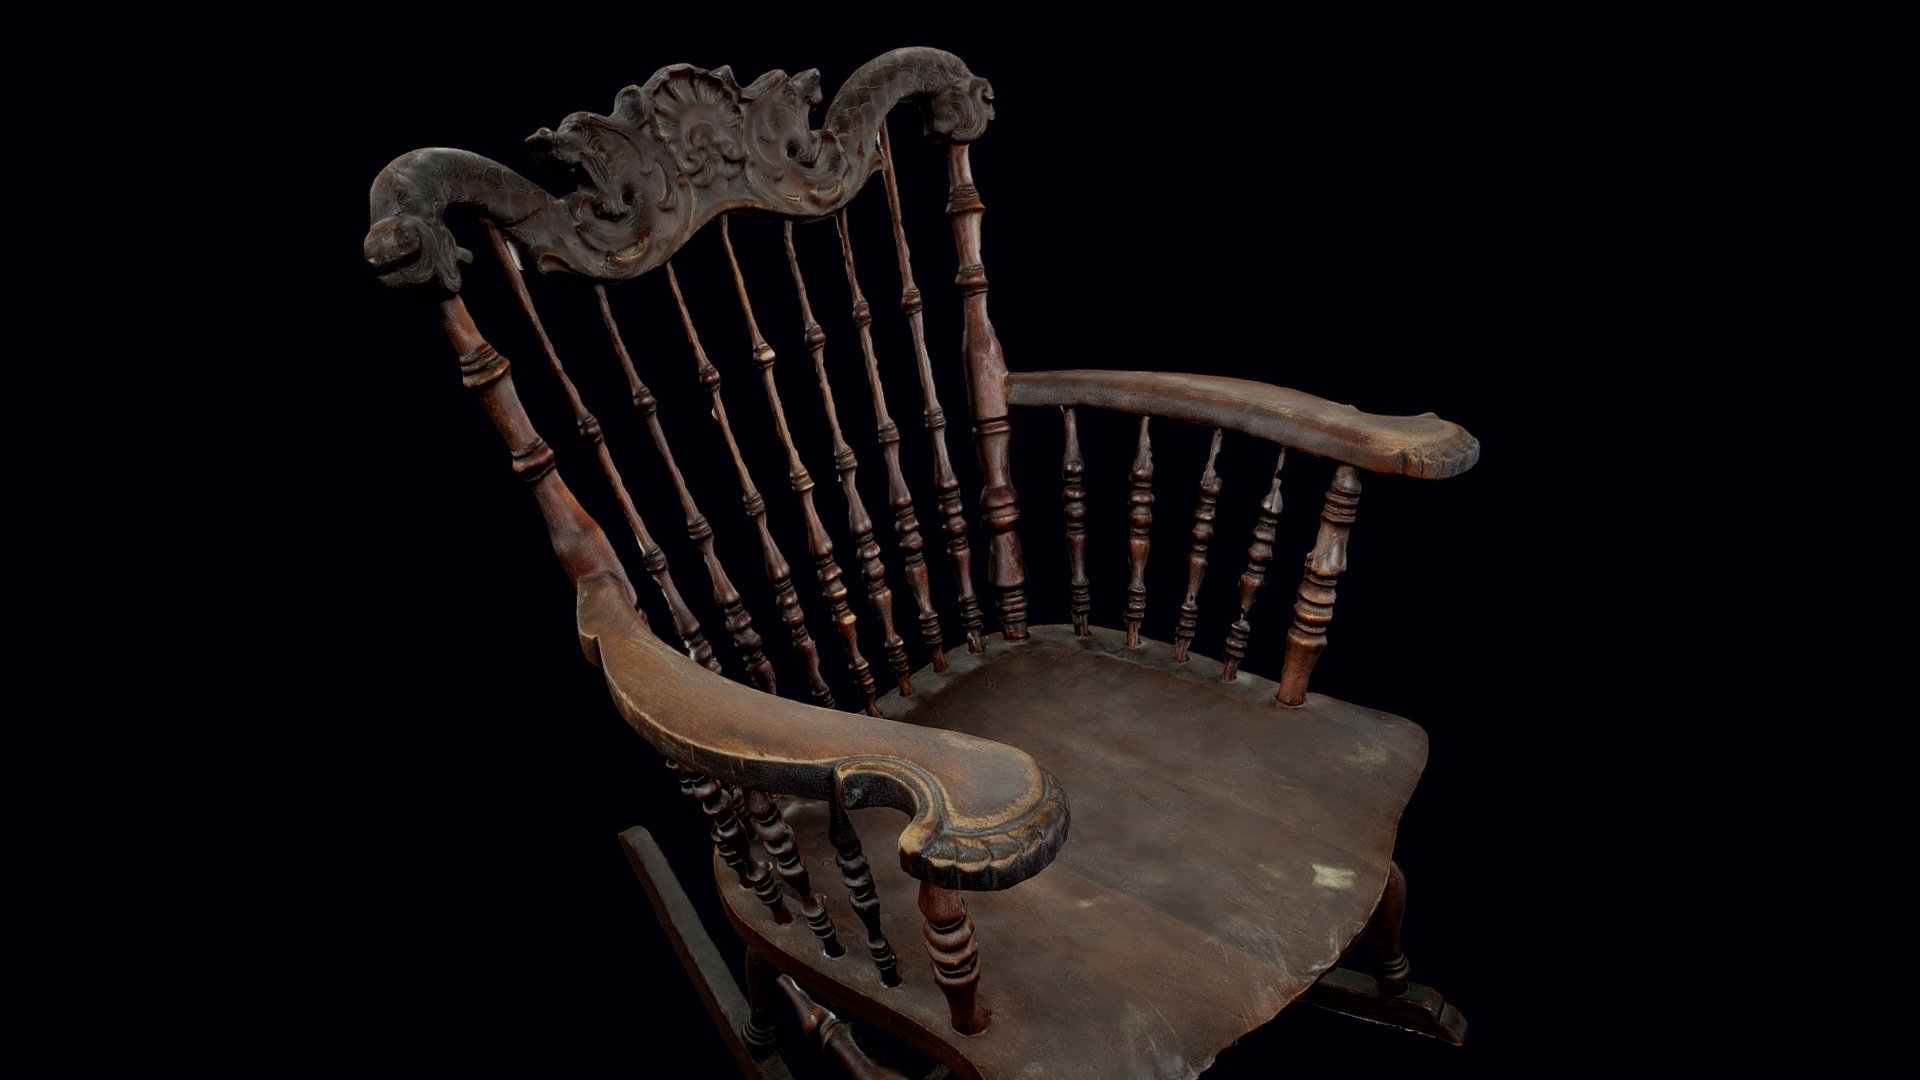 Antique carved wooden rocking chair with sea monster and shell motif. Photogrammetry scan with 118 photos taken with a Canon EOS 5DS R and 50mm lens 3d model